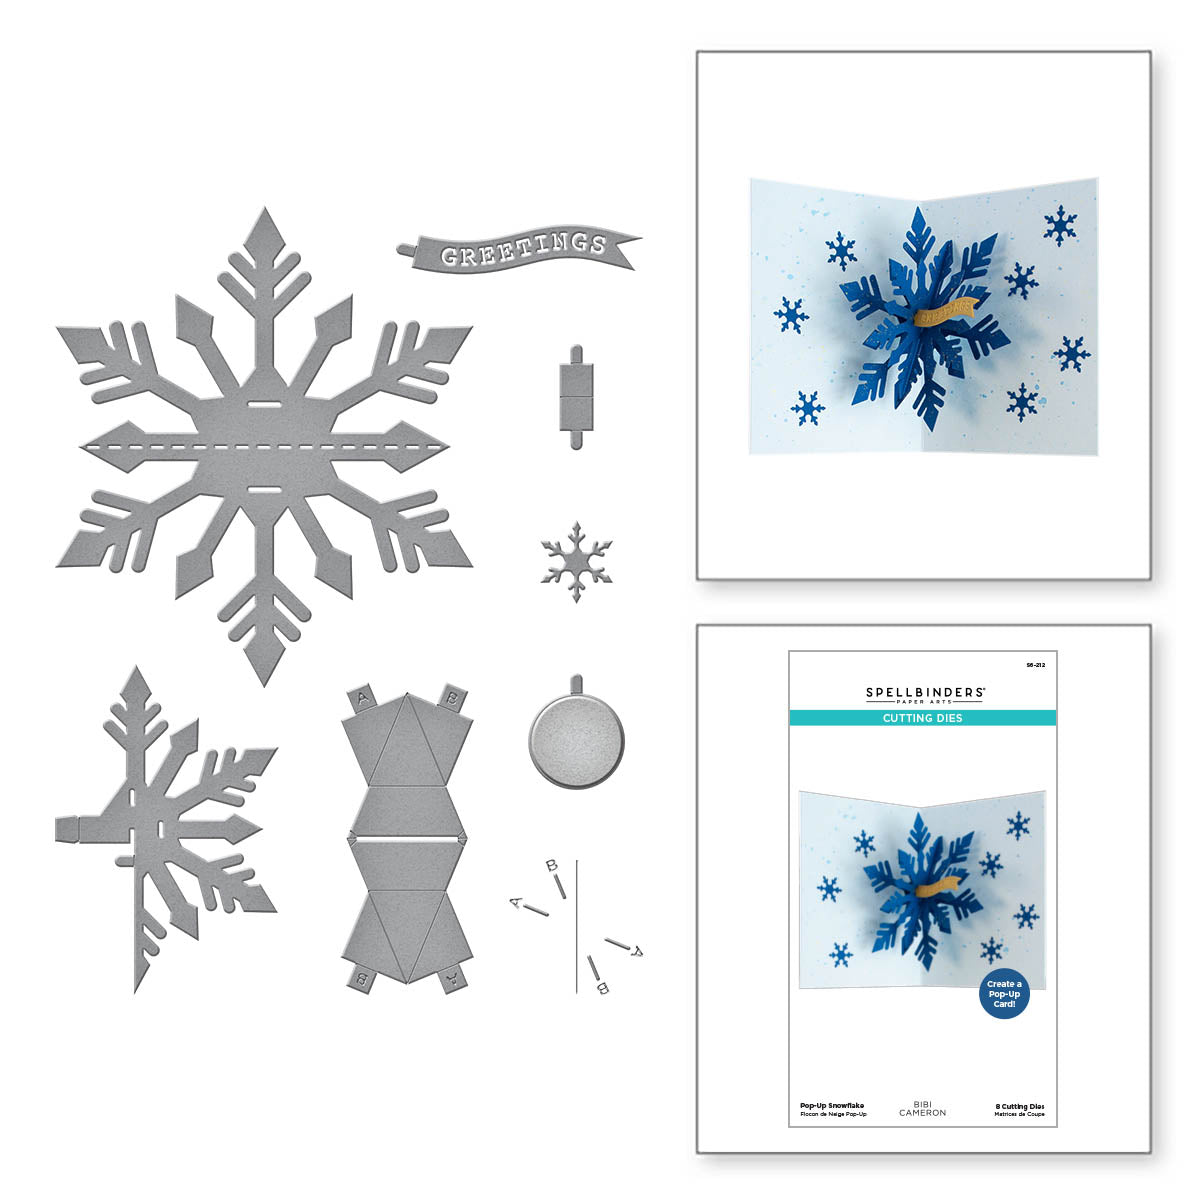 Pop-Up Snowflake Etched Dies from the Bibi's Snowflakes Collection by Bibi Cameron